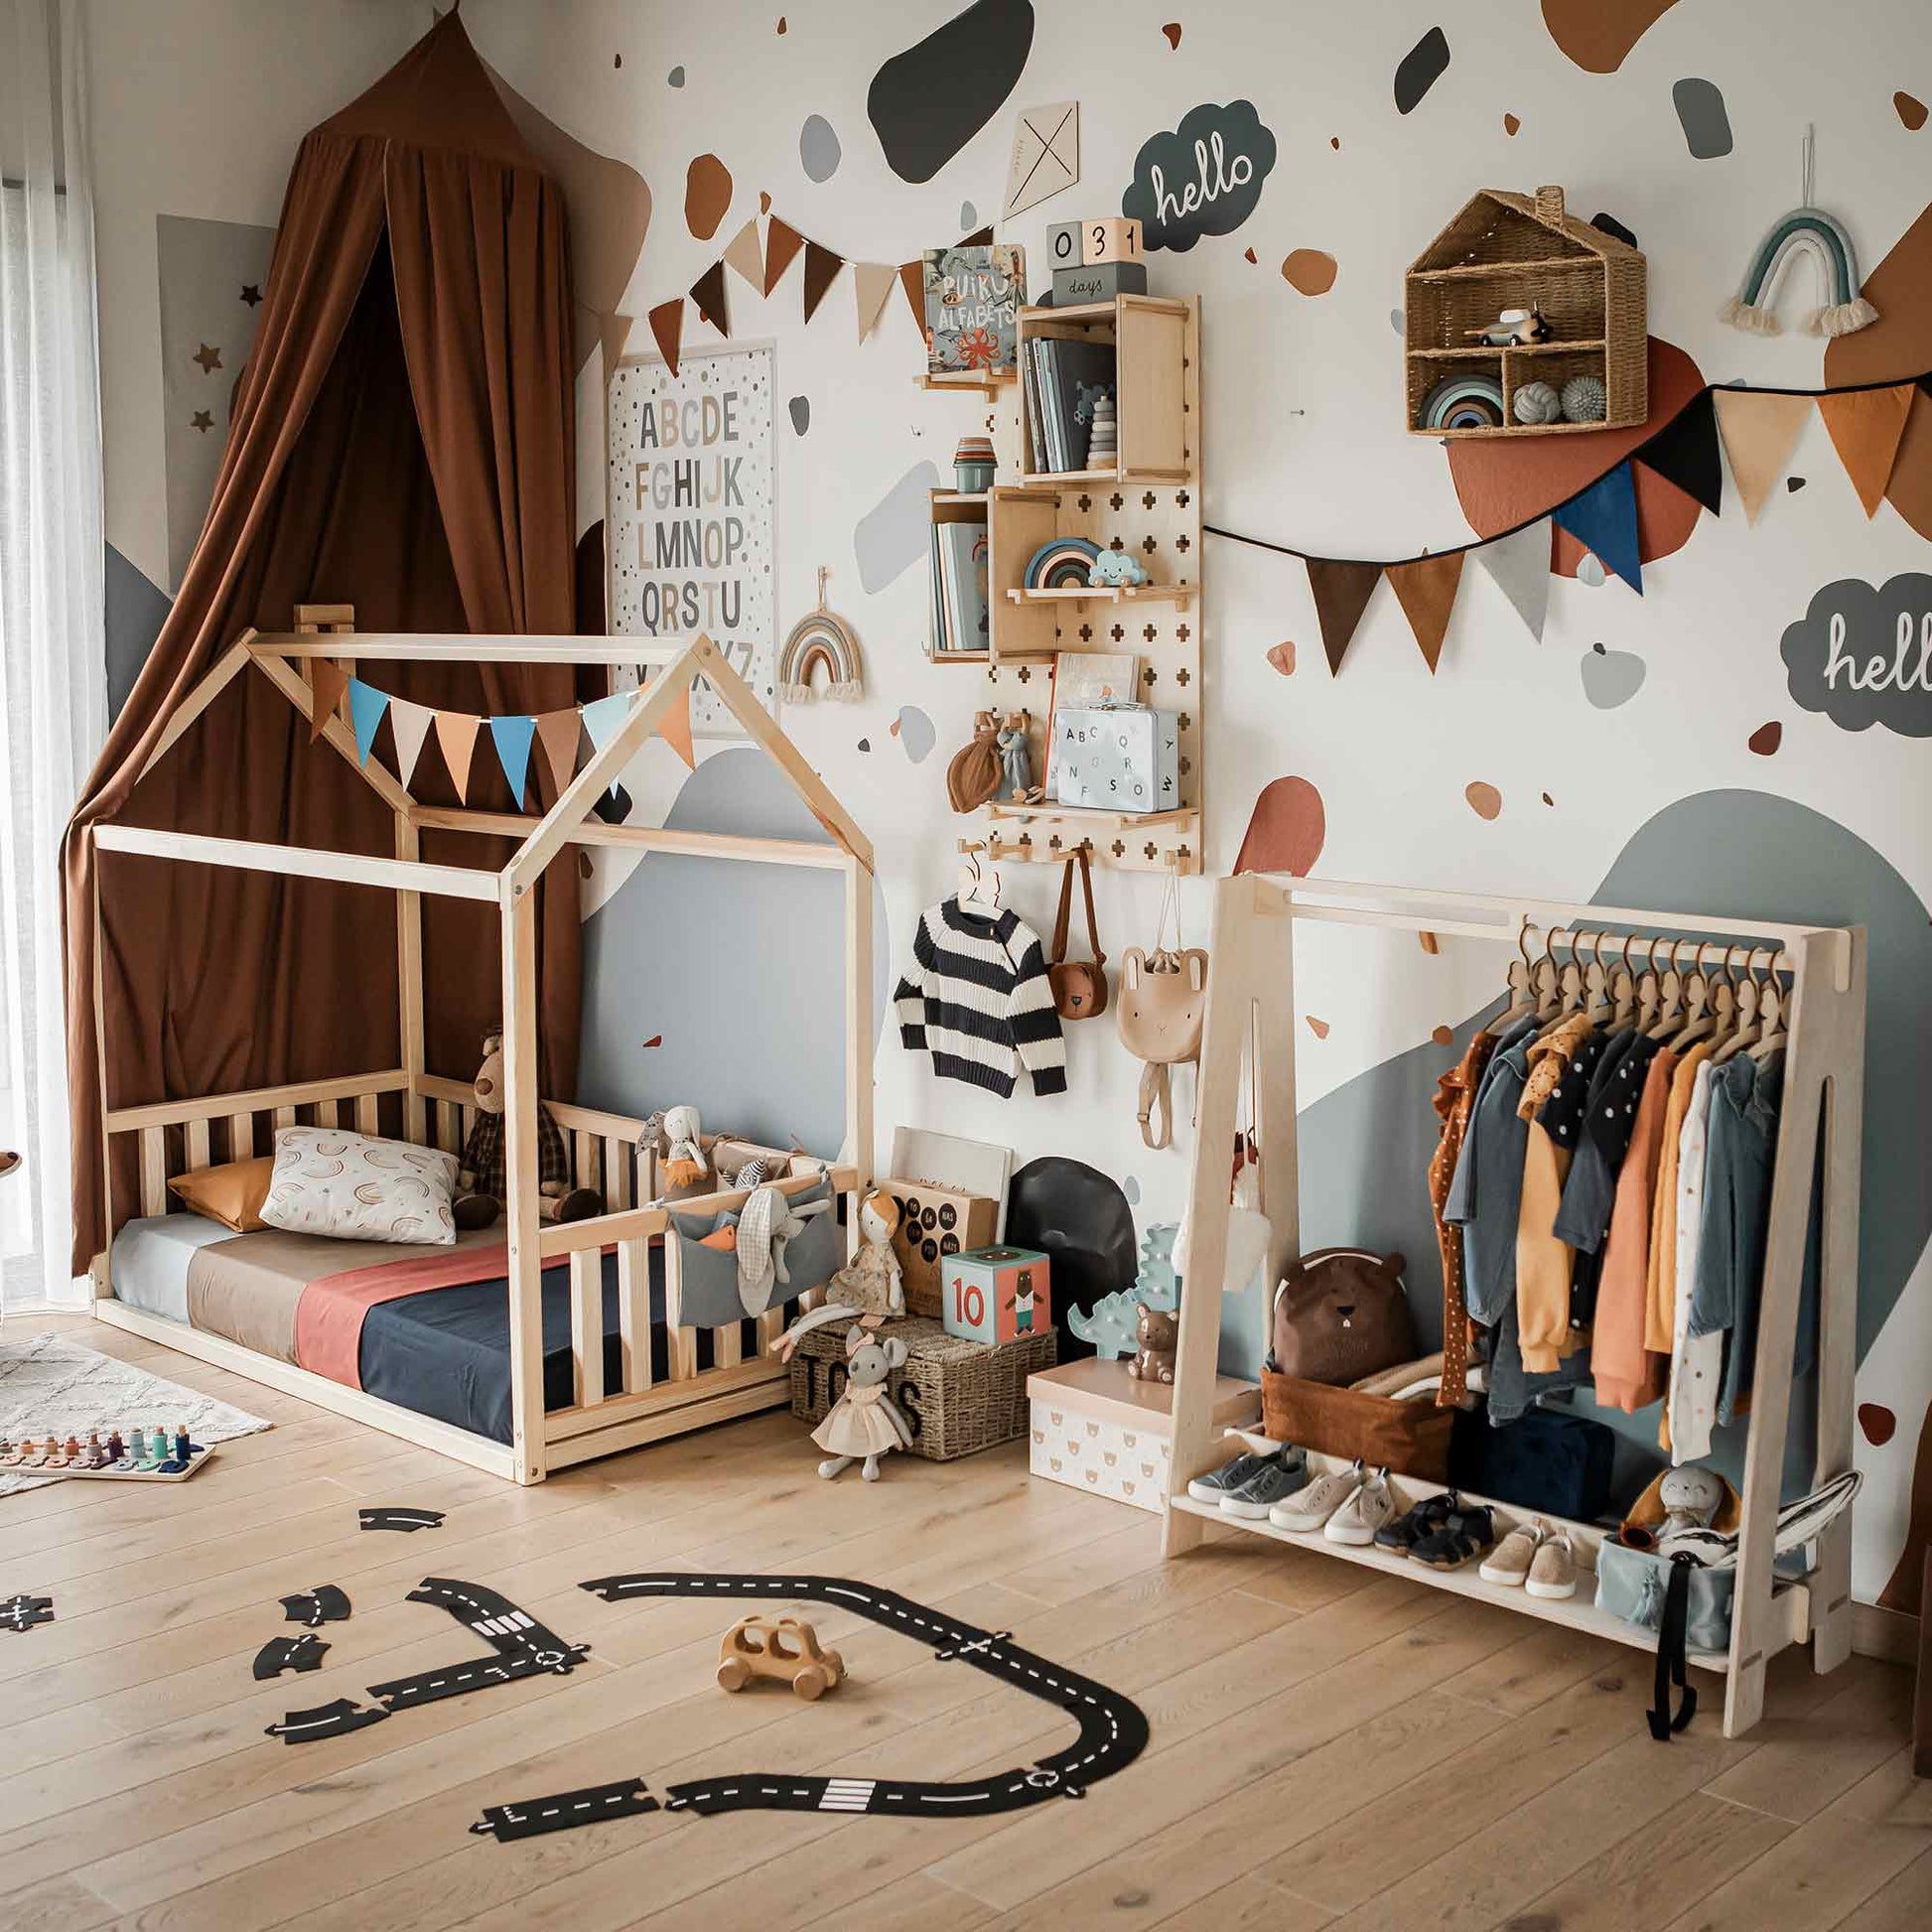 A kids' bedroom featuring a wooden house-frame bed, an area designated for play, a Kids' clothing rack for dress-up storage, toys scattered around, and wall shelves adorned with various decorations. The room is decorated in a beige and brown color scheme.